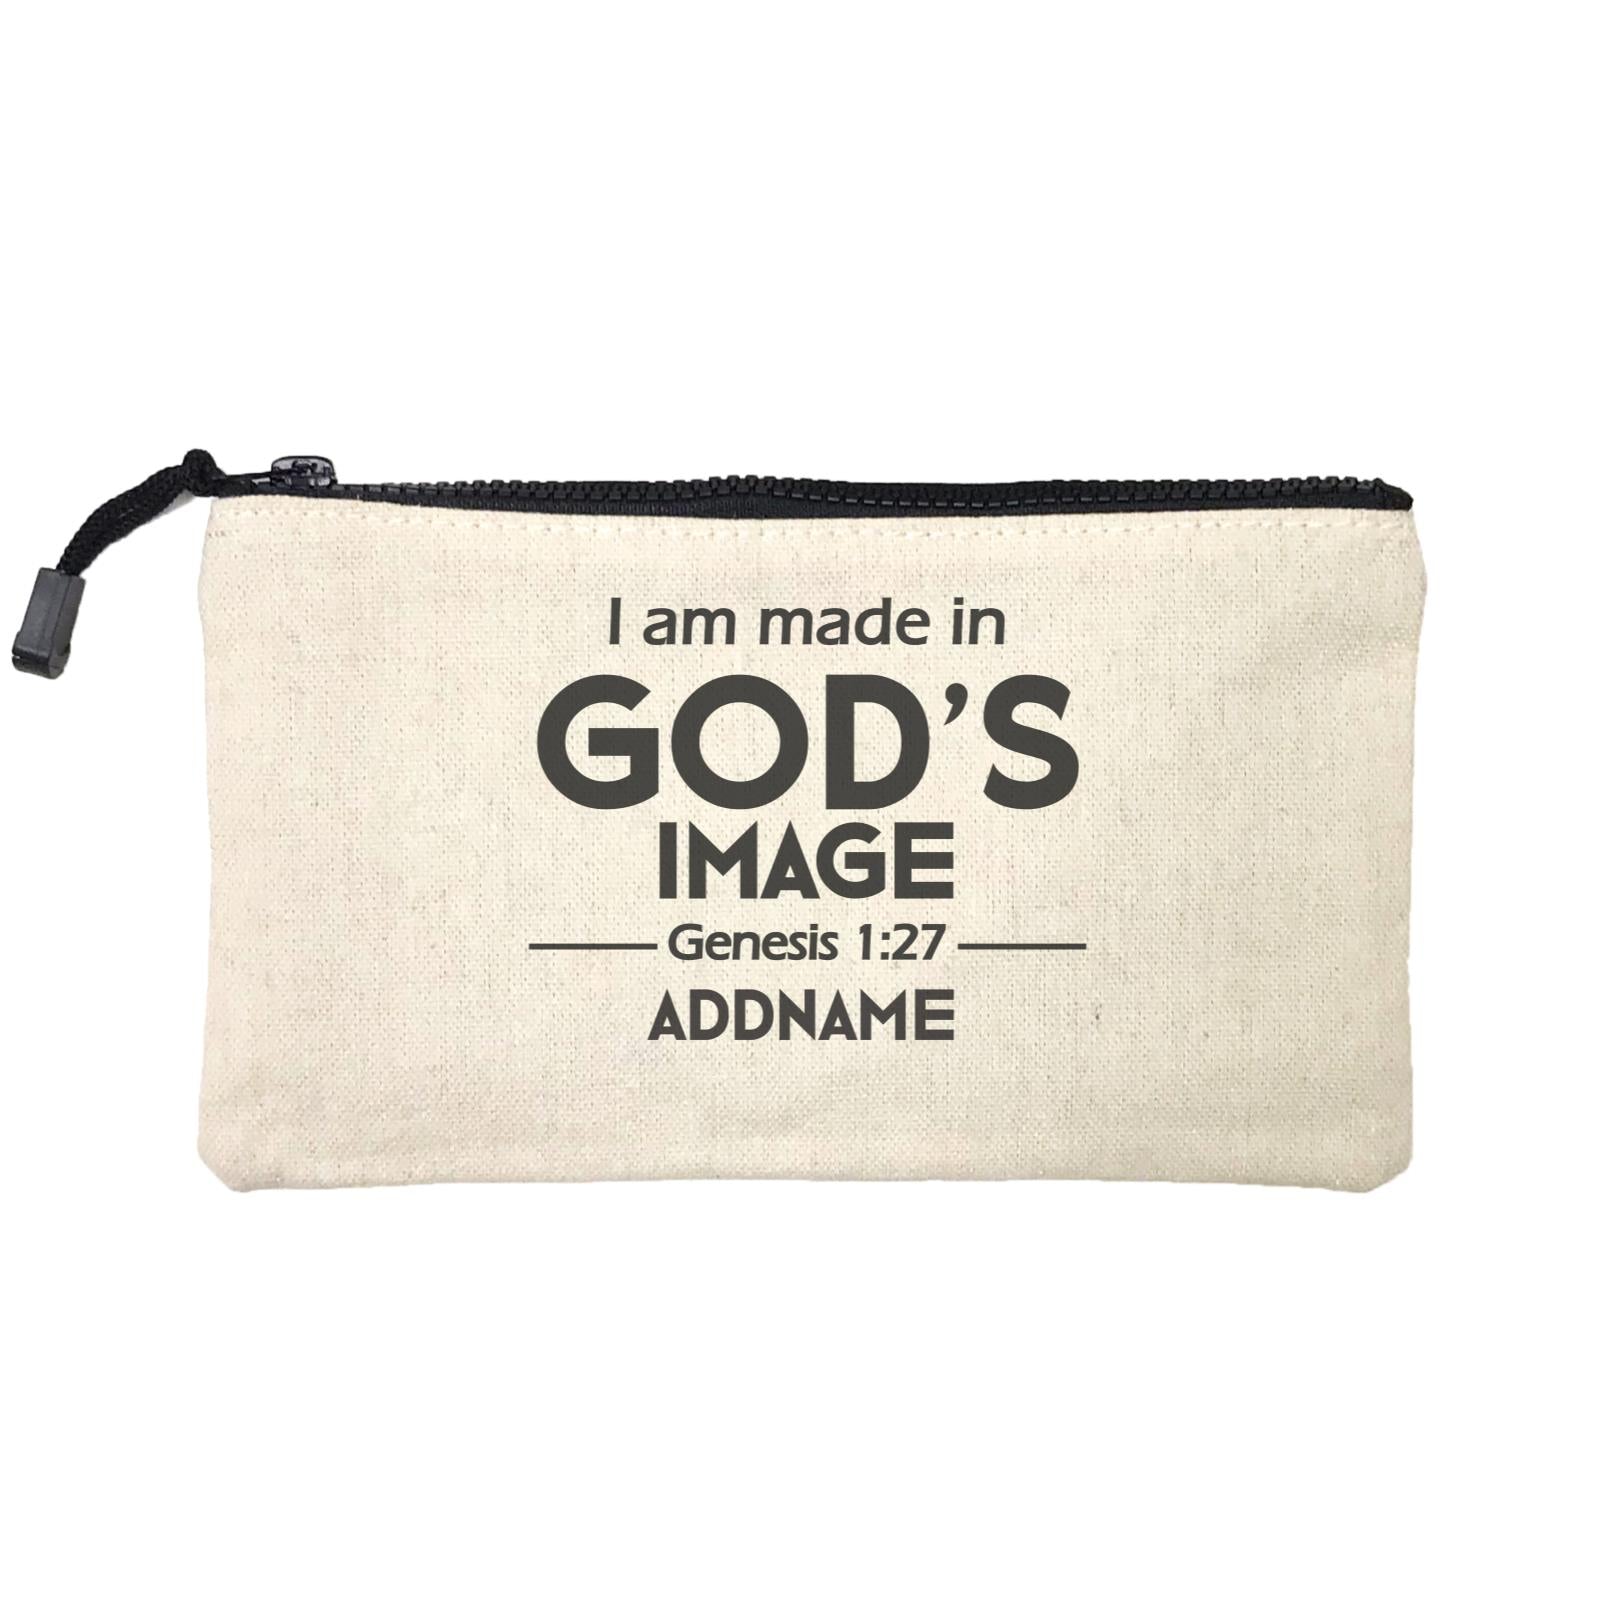 Christian Baby I Am Made in God's Image Genesis 1.27 Addname Mini Accessories Stationery Pouch